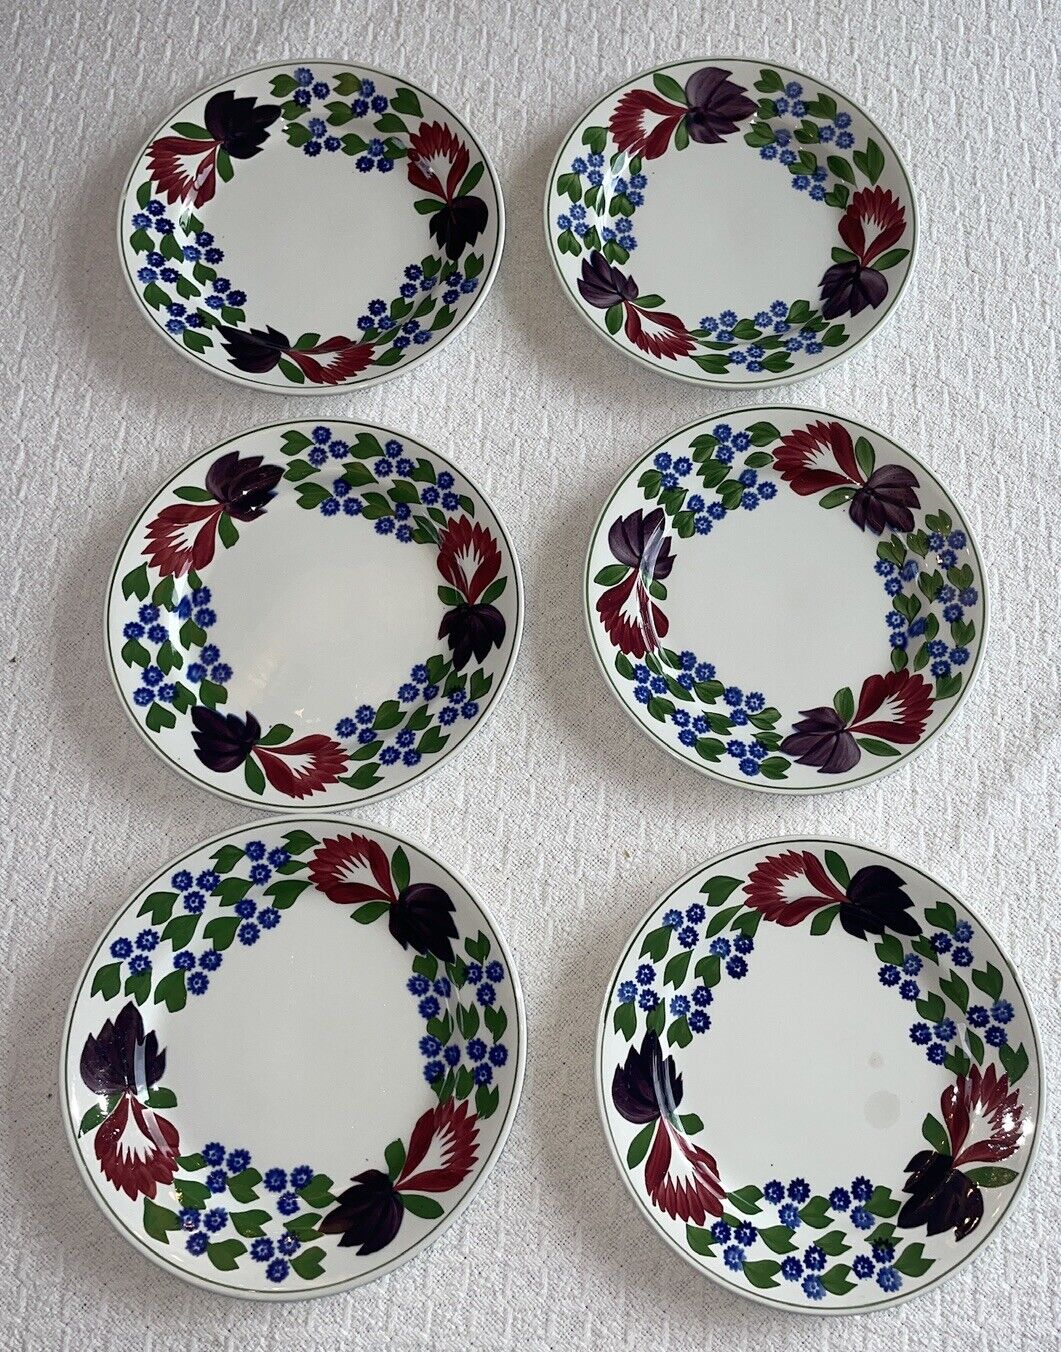 Rare Find - Antique Adams Made In England Stick Spatterware Set Of 6 Plates